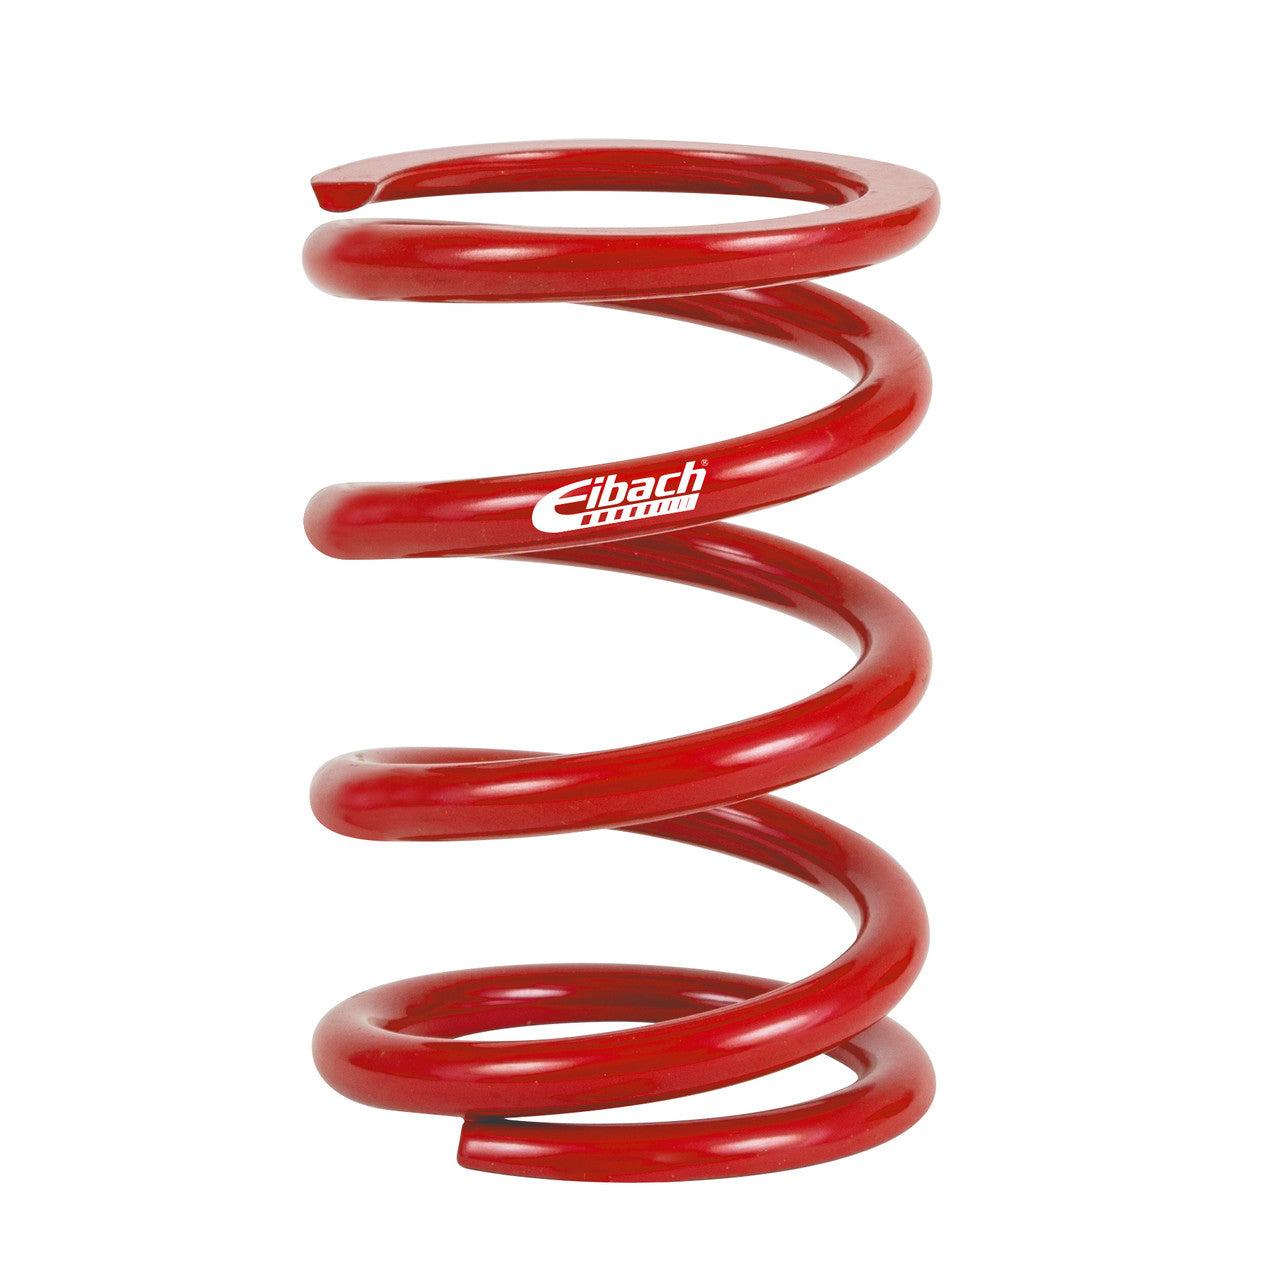 Eibach Metric Coilover Spring - 60MM I.D. 100-60-0750